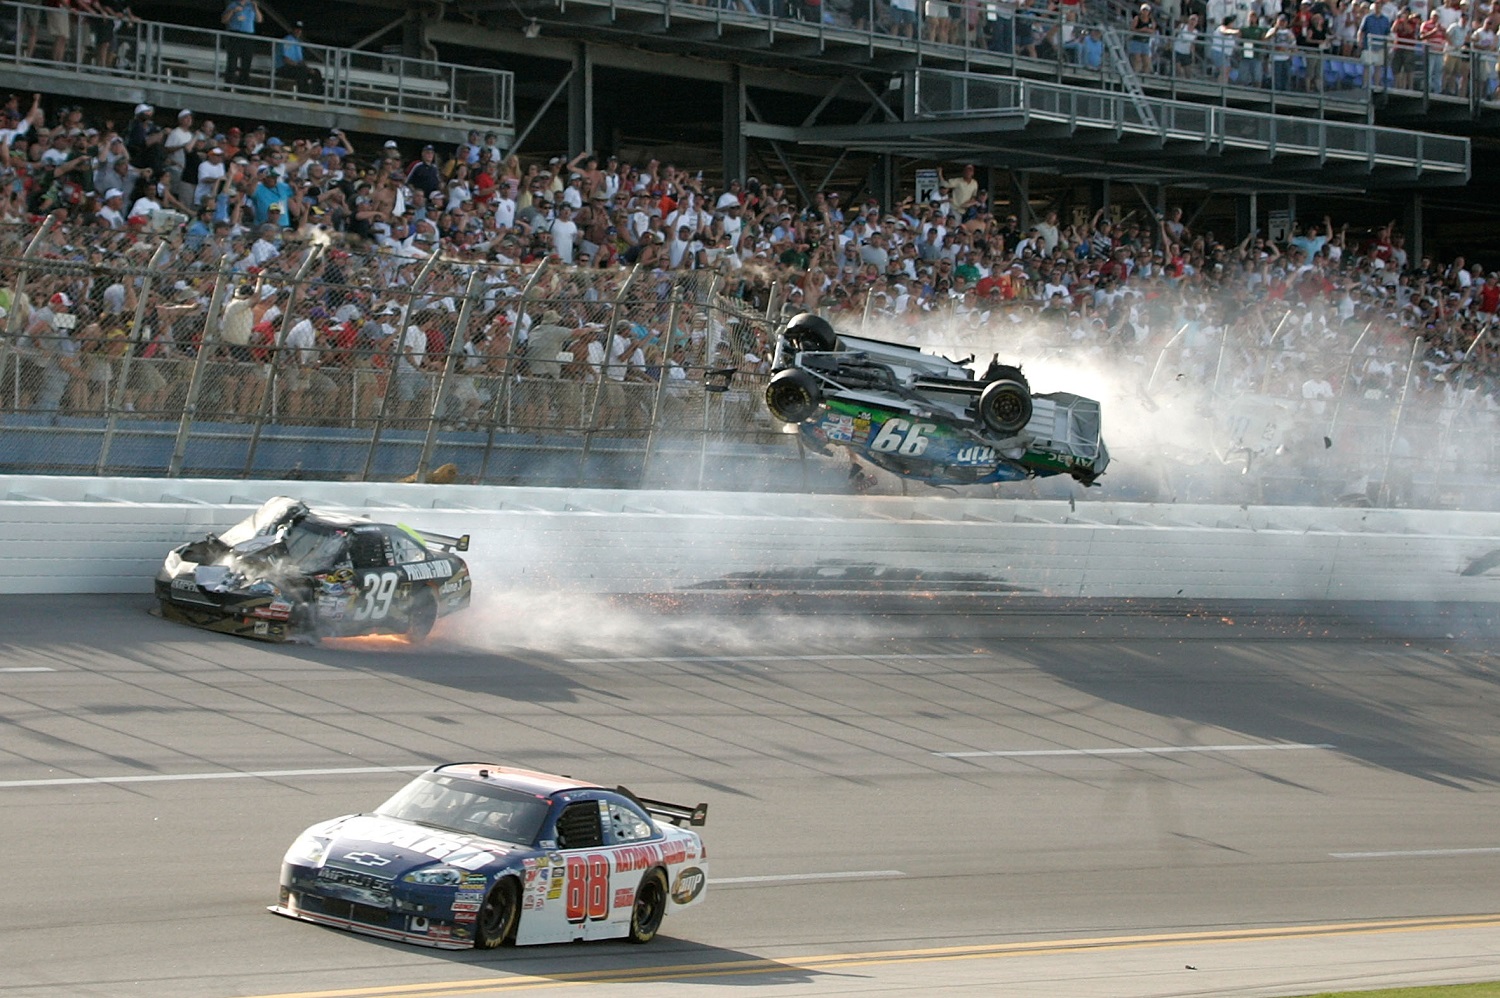 Carl Edwards goes airborne as the car of Ryan Newman suffers damage and Dale Earnhardt Jr. drives by on the inside in the Aaron's 499 at Talladega Superspeedway on April 26, 2009.